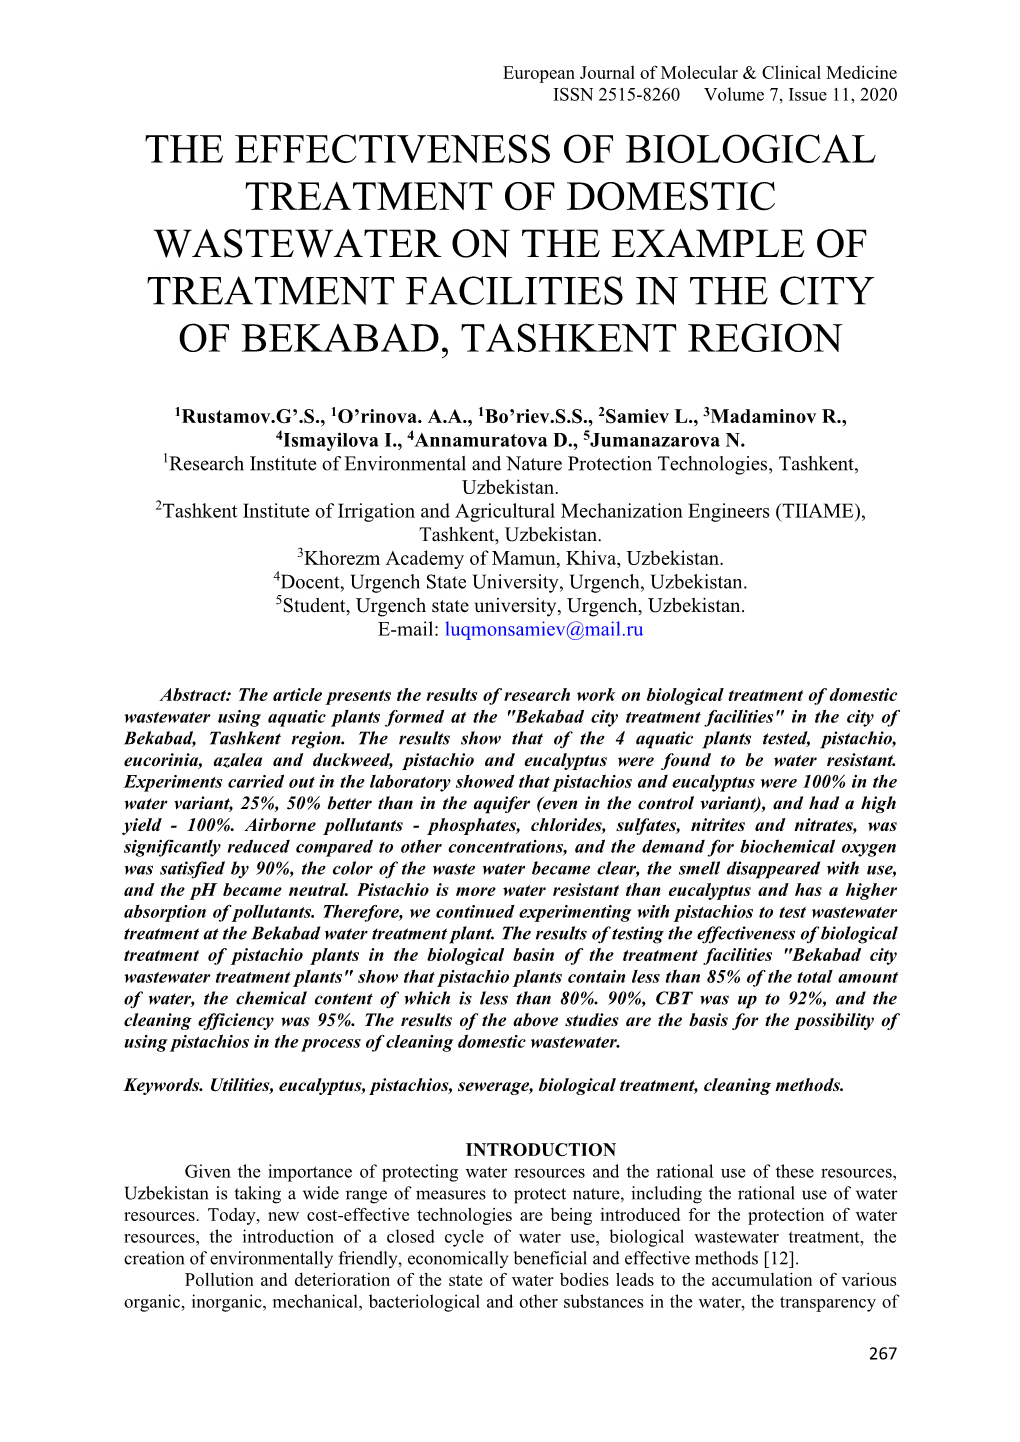 The Effectiveness of Biological Treatment of Domestic Wastewater on the Example of Treatment Facilities in the City of Bekabad, Tashkent Region